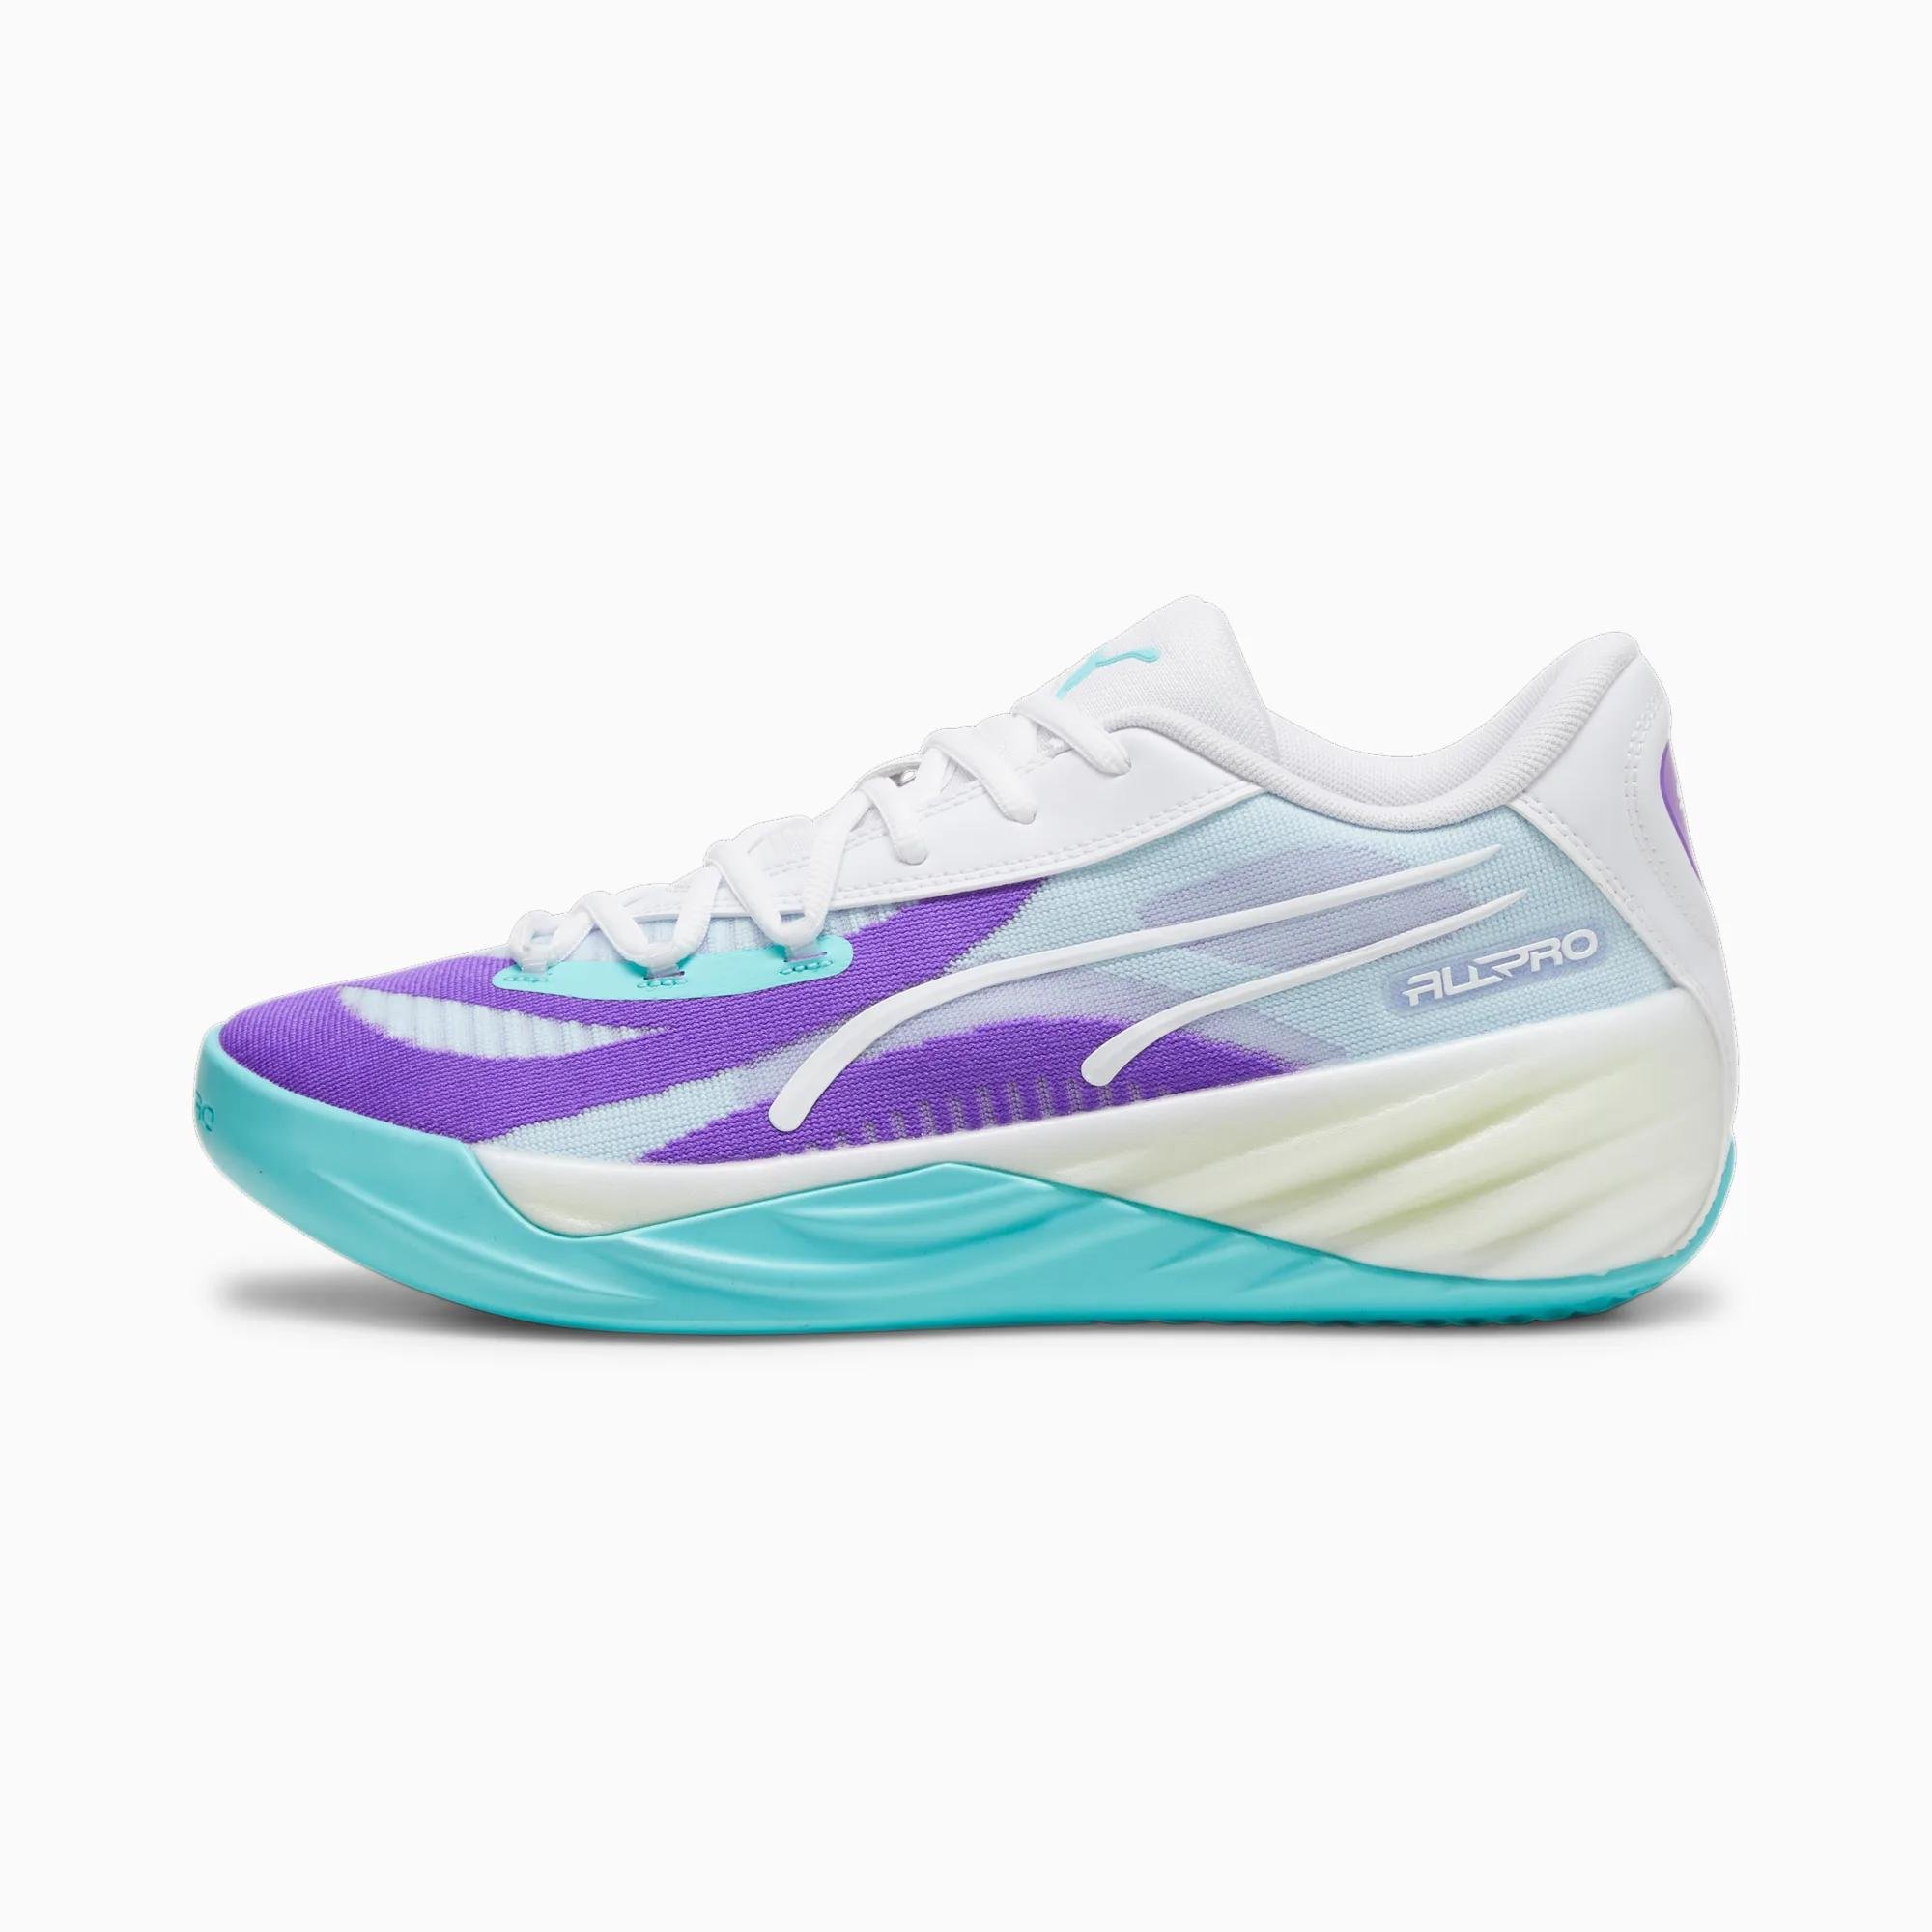 All Pro NITRO™ Men's Basketball Shoes by PUMA